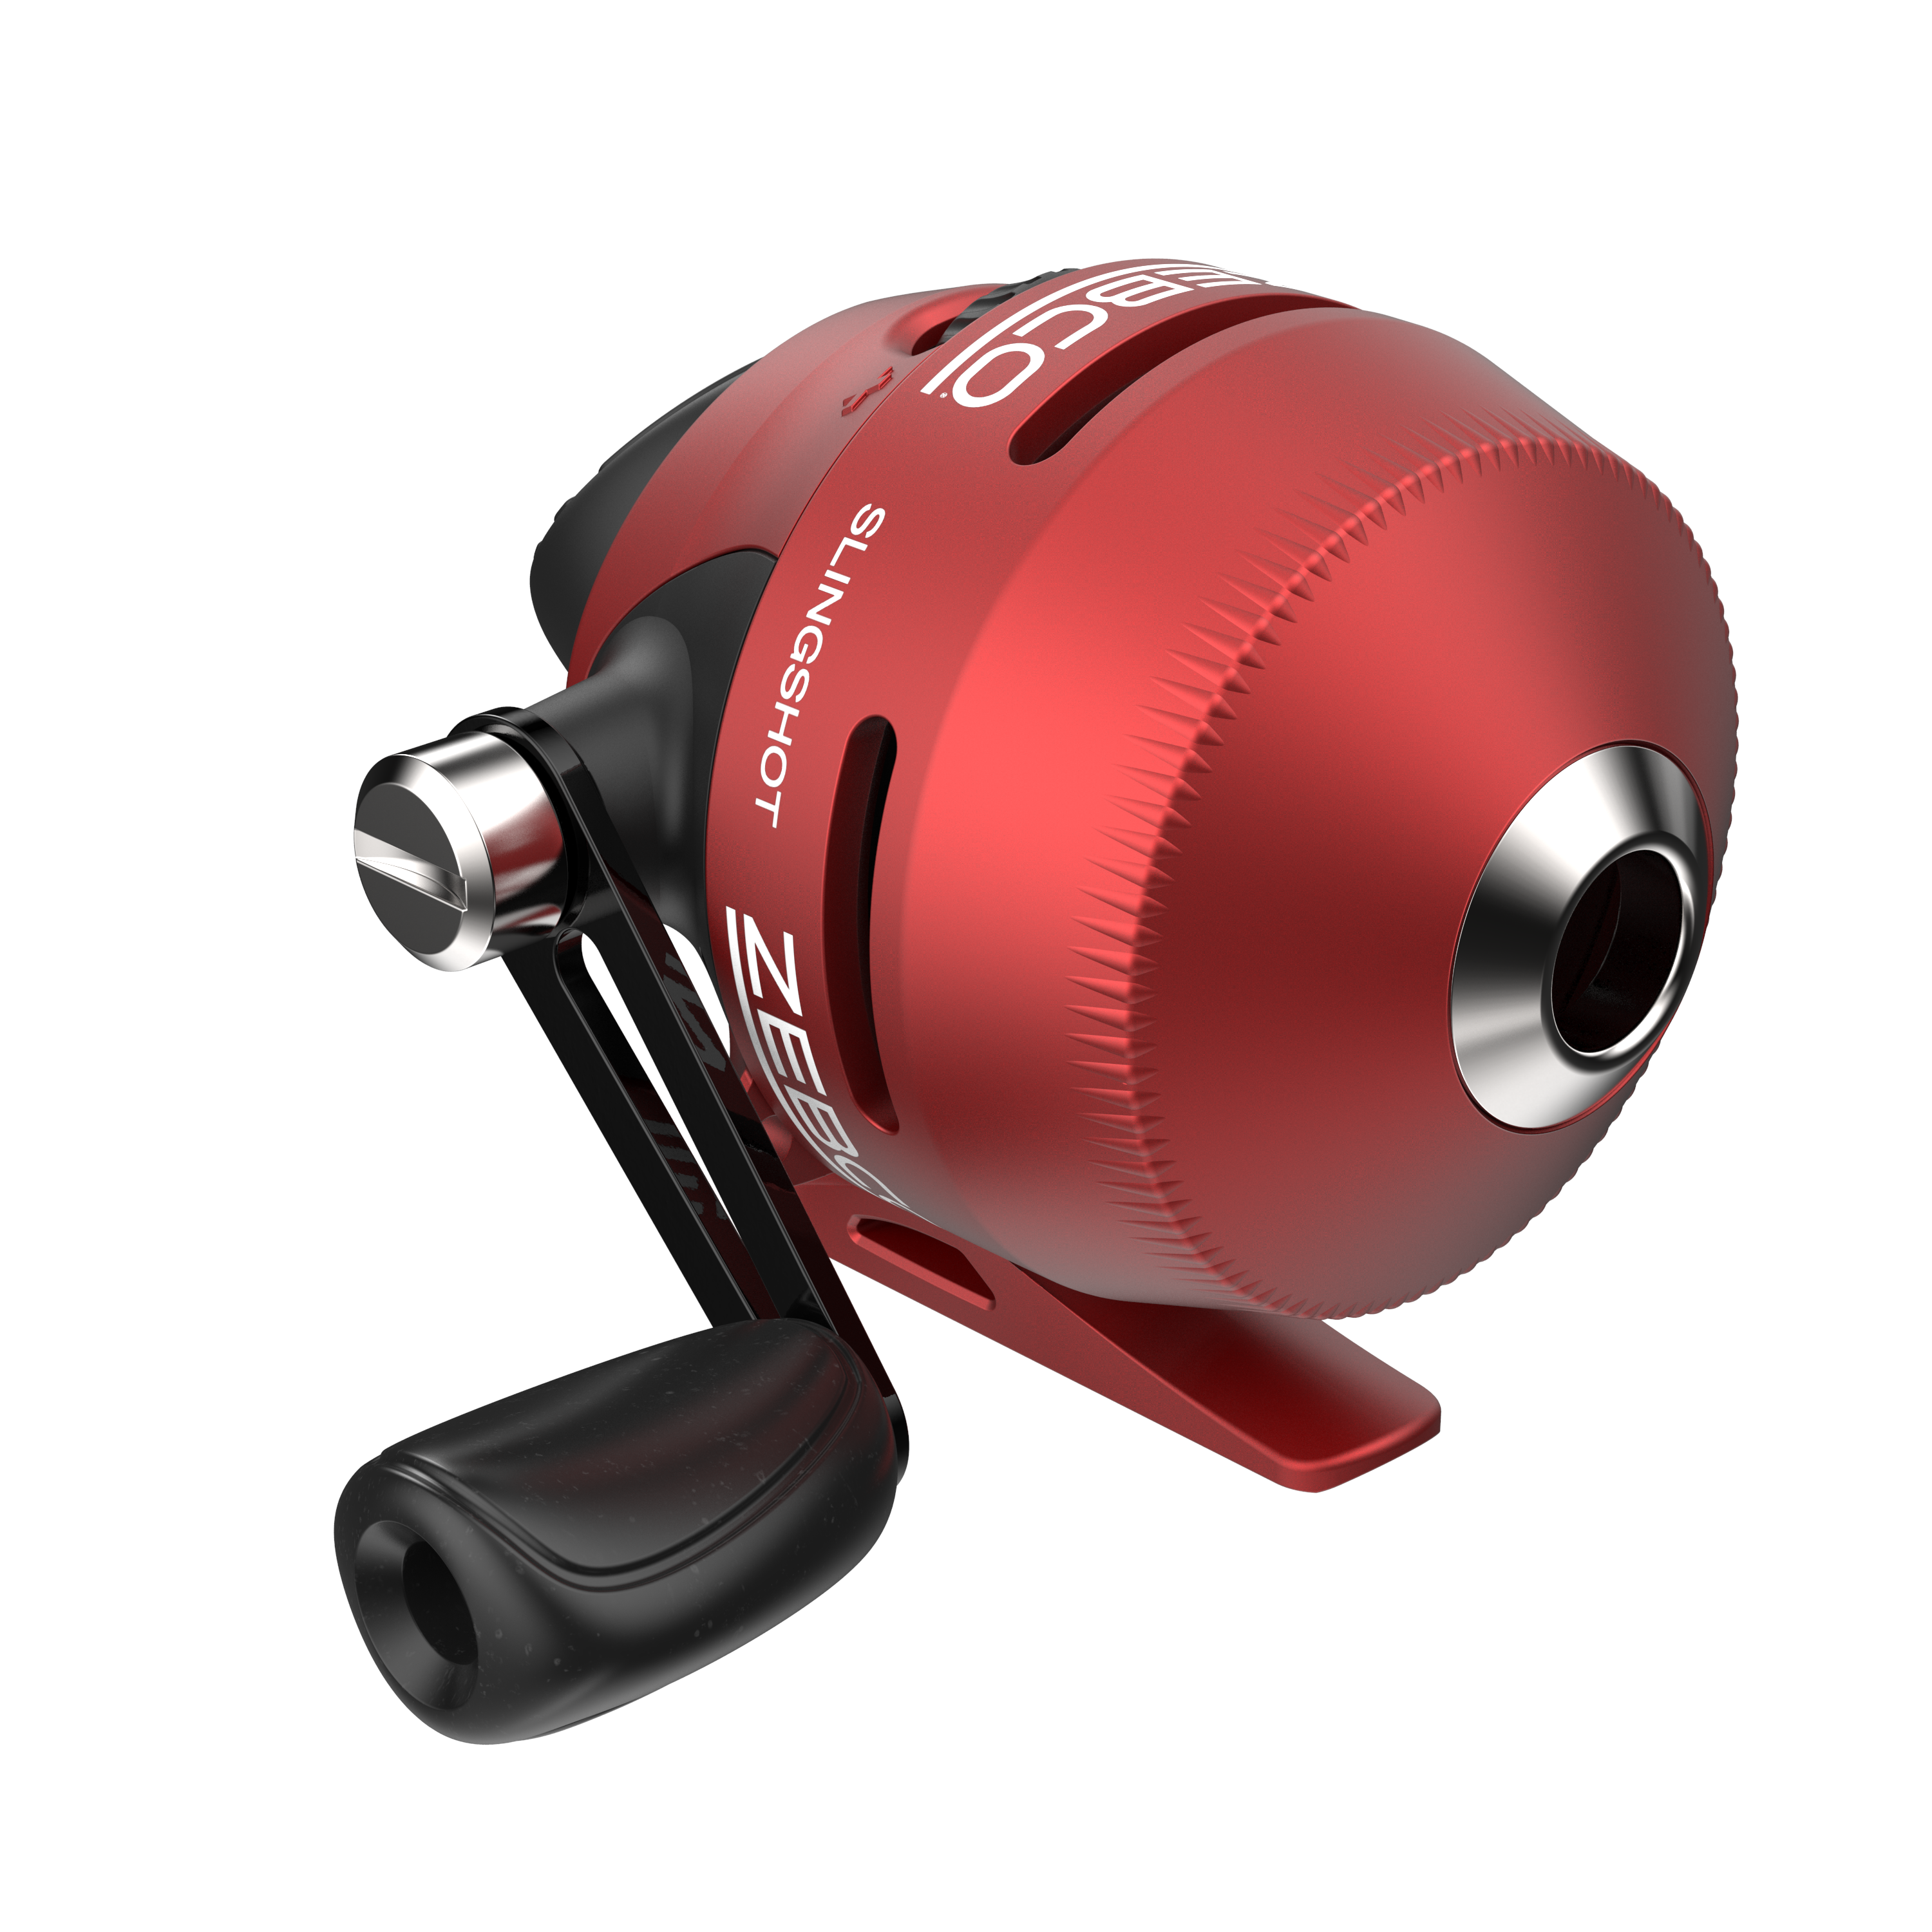 Zebco Slingshot Spincast Reel and Fishing Rod Combo, Red - image 3 of 6